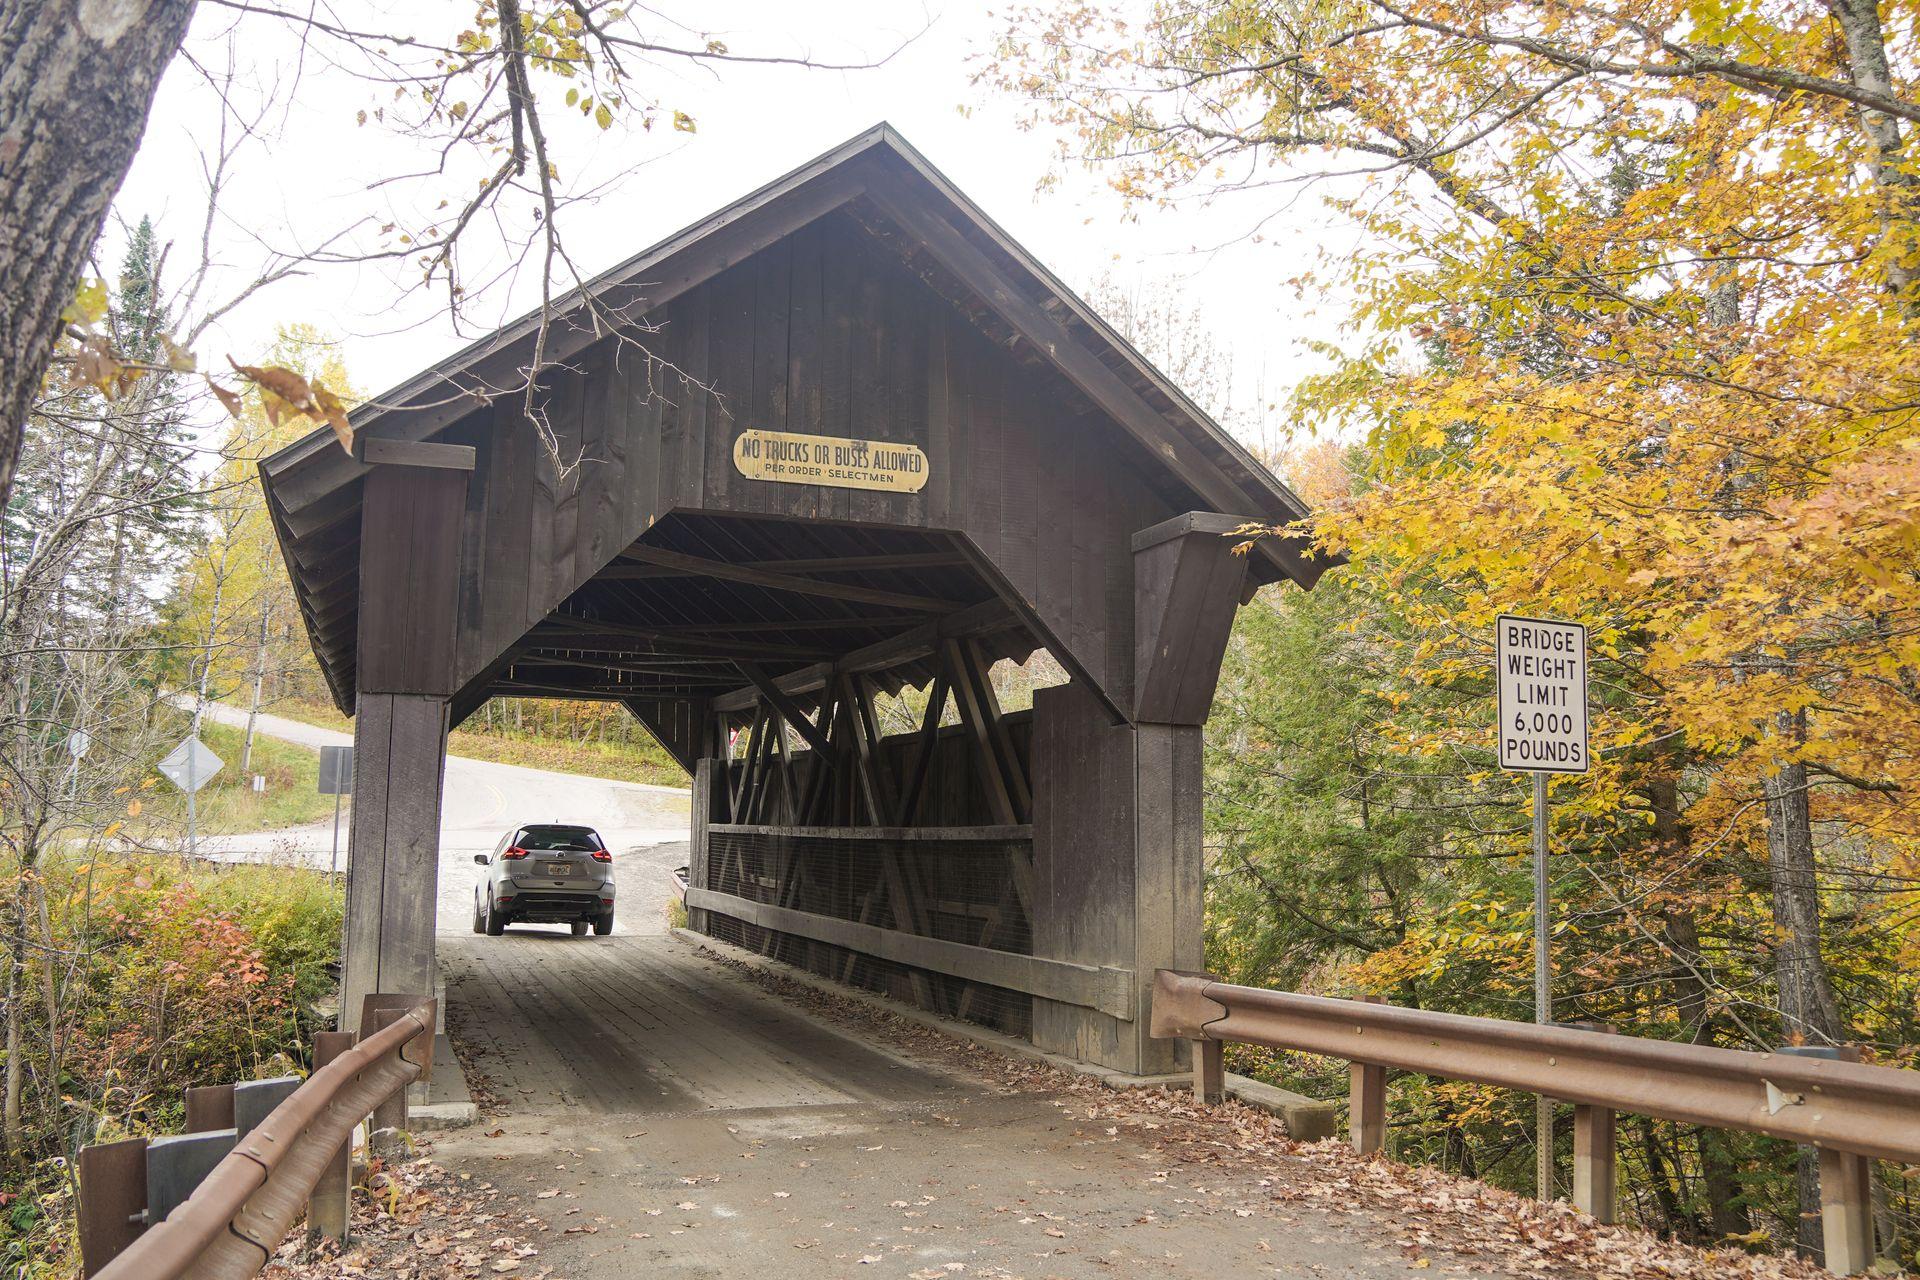 A car driving through a wooden covered bridge in Vermont.